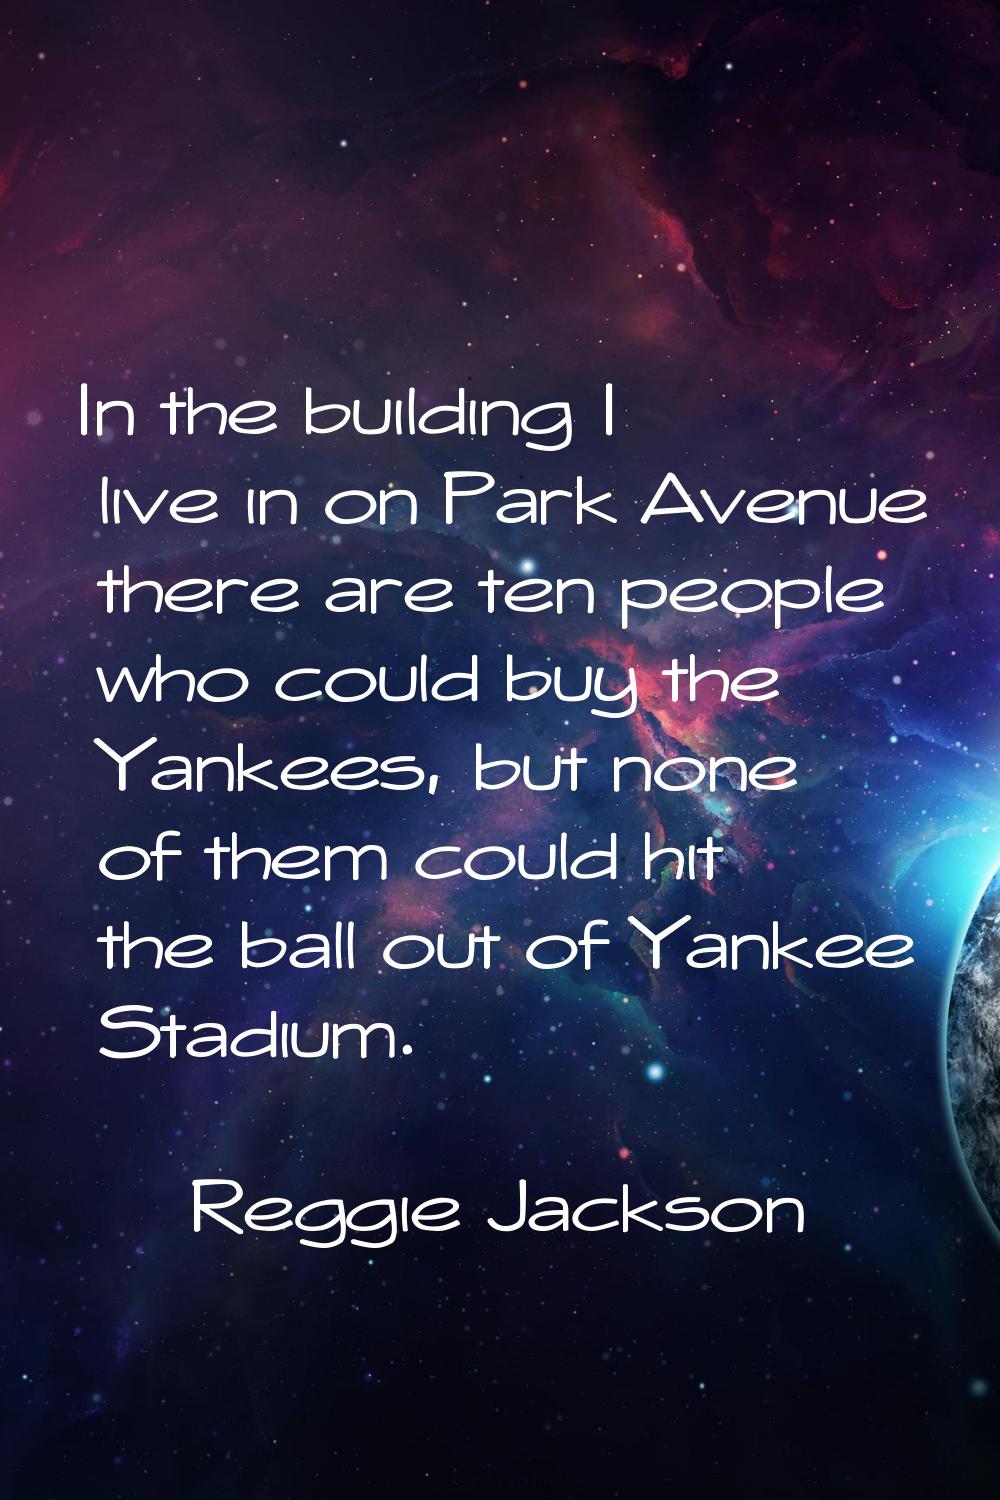 In the building I live in on Park Avenue there are ten people who could buy the Yankees, but none o